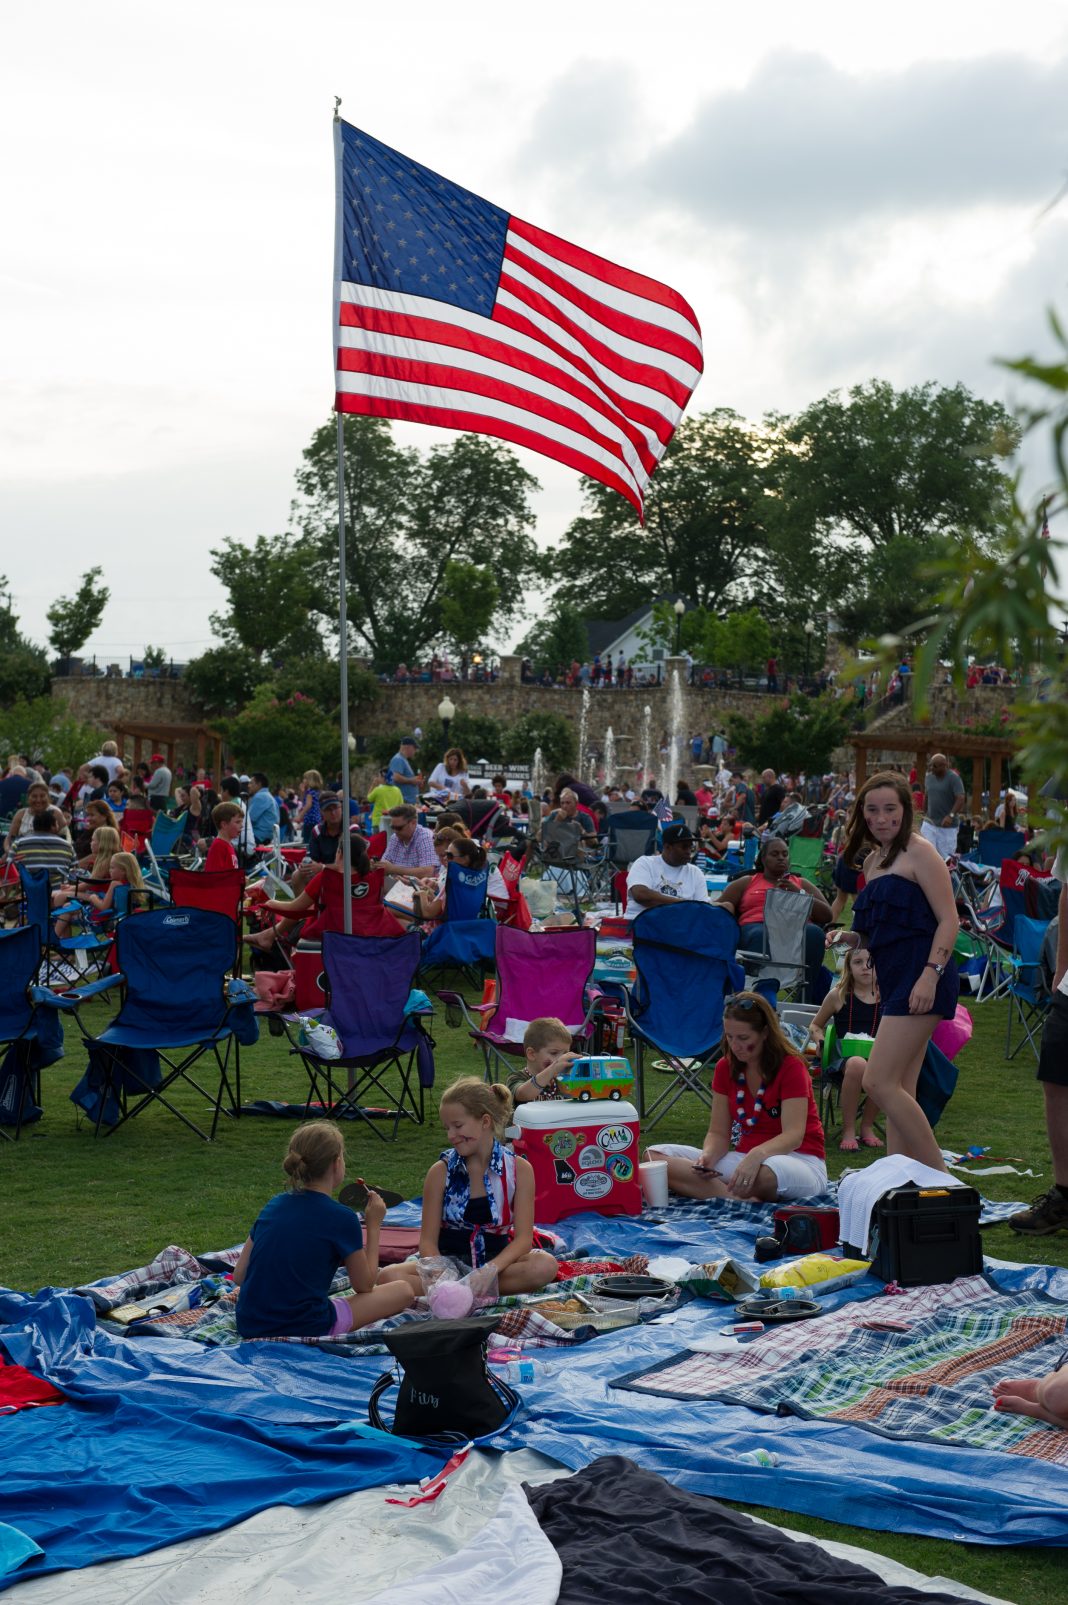 Norcross to Celebrate America with Red, White & BOOM! Event on July 3